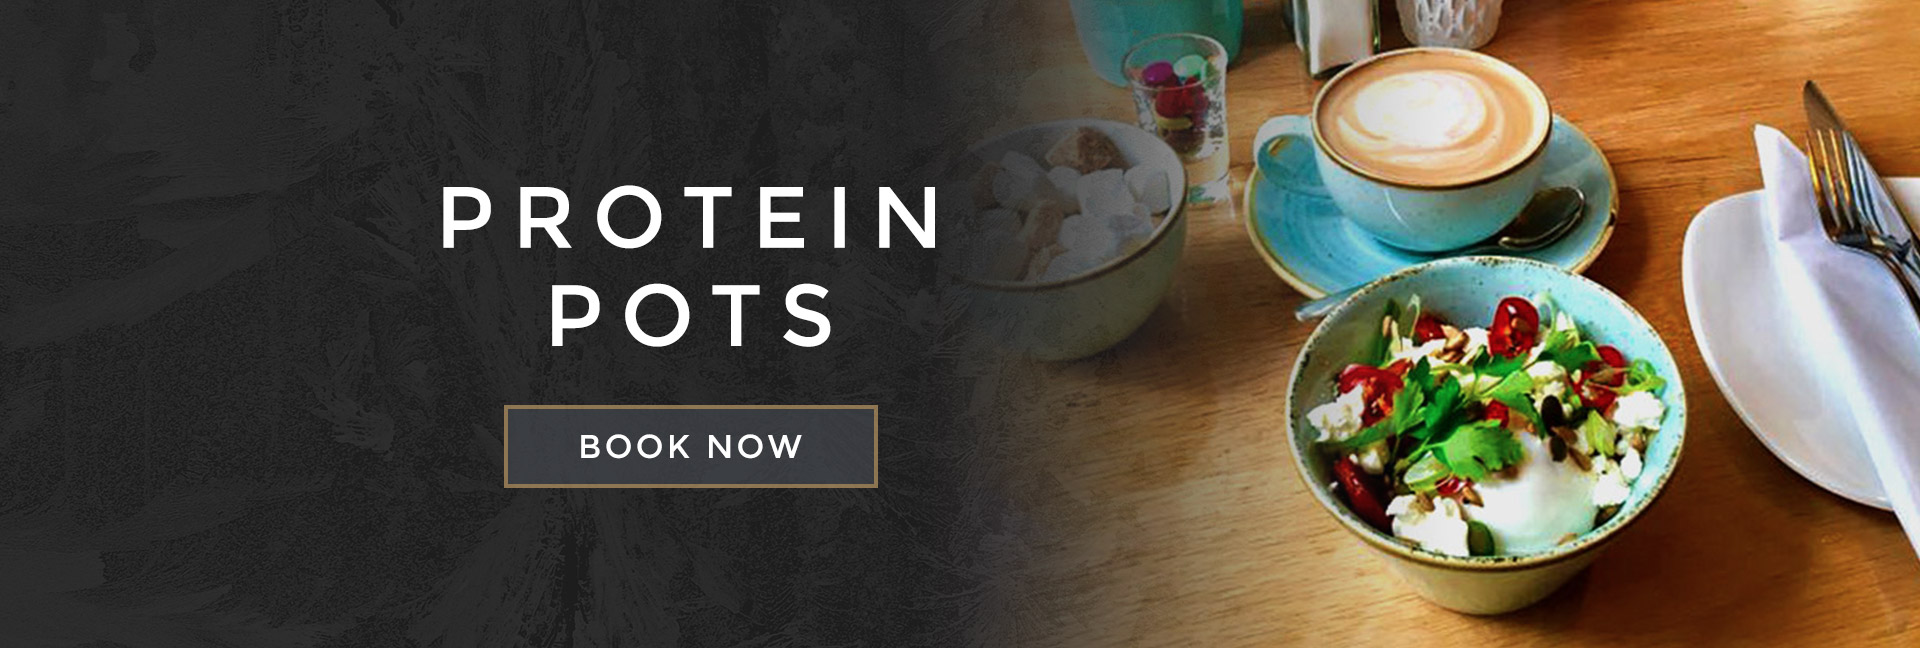 Protein pots at All Bar One Glasgow - Book your table